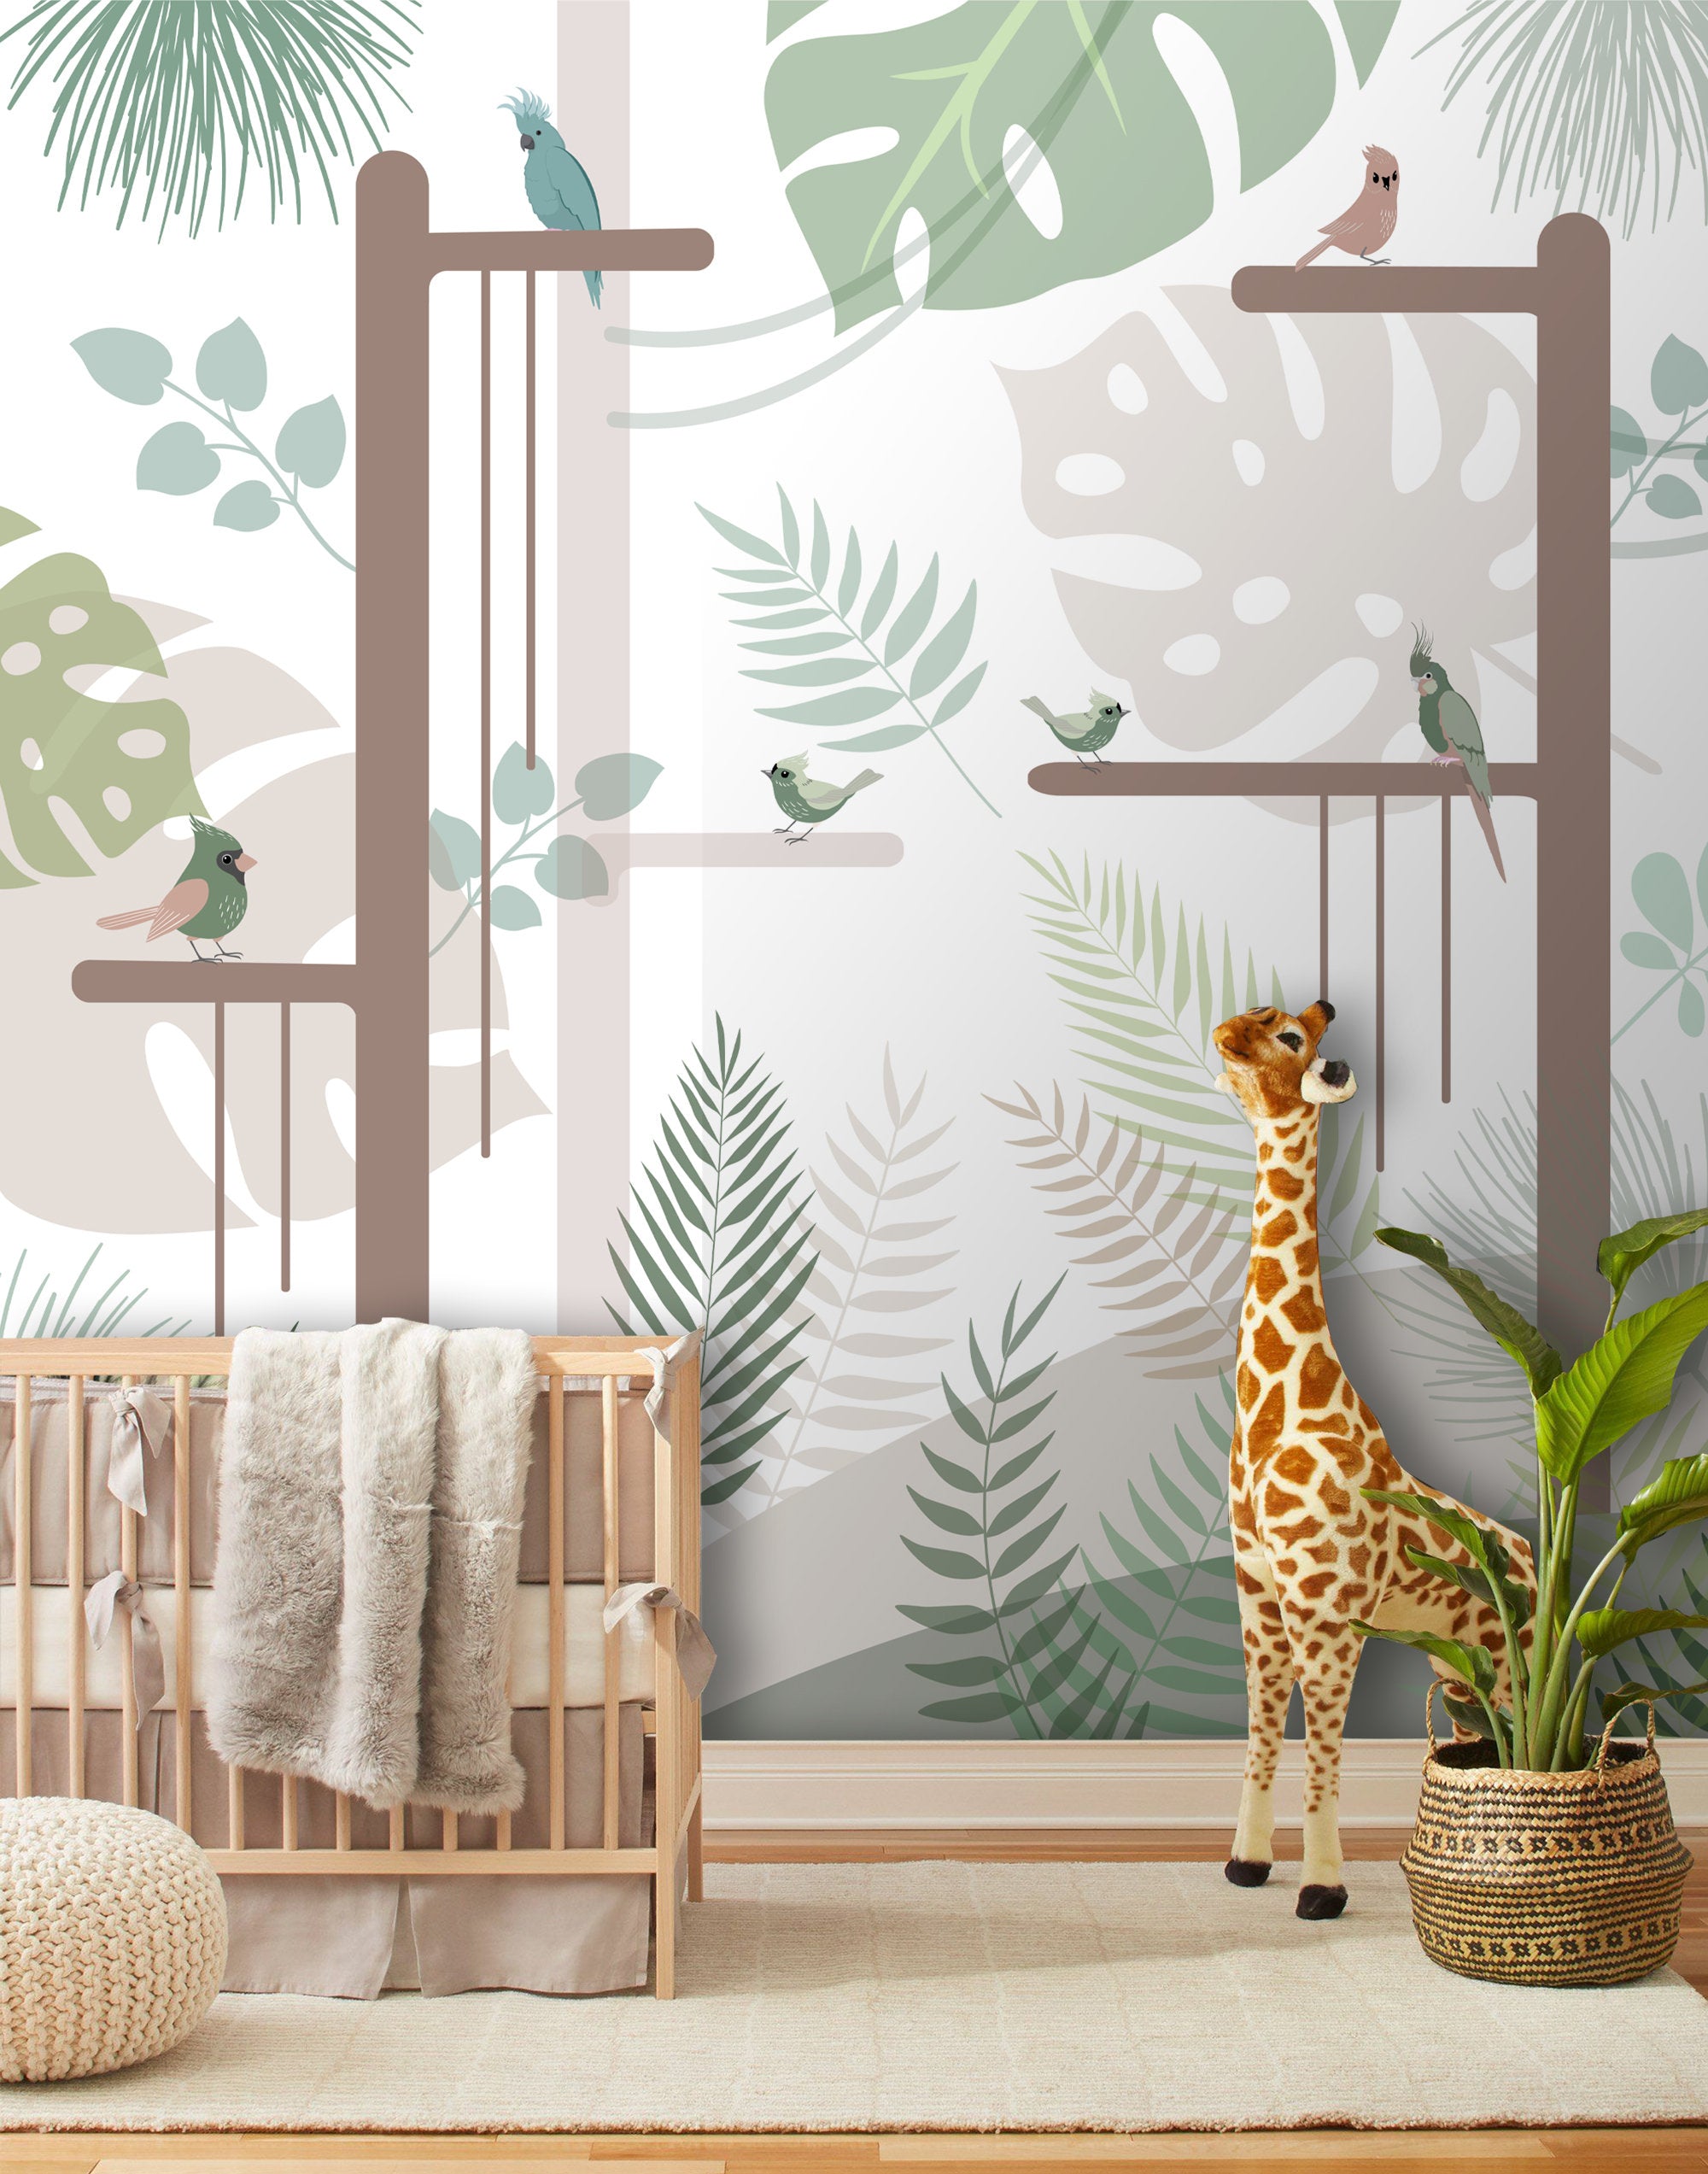 Abstract Exotic Plant Leaves Birds Wallpaper Self Adhesive Peel and Stick Wall Sticker Wall Decoration Scandinavian Removable